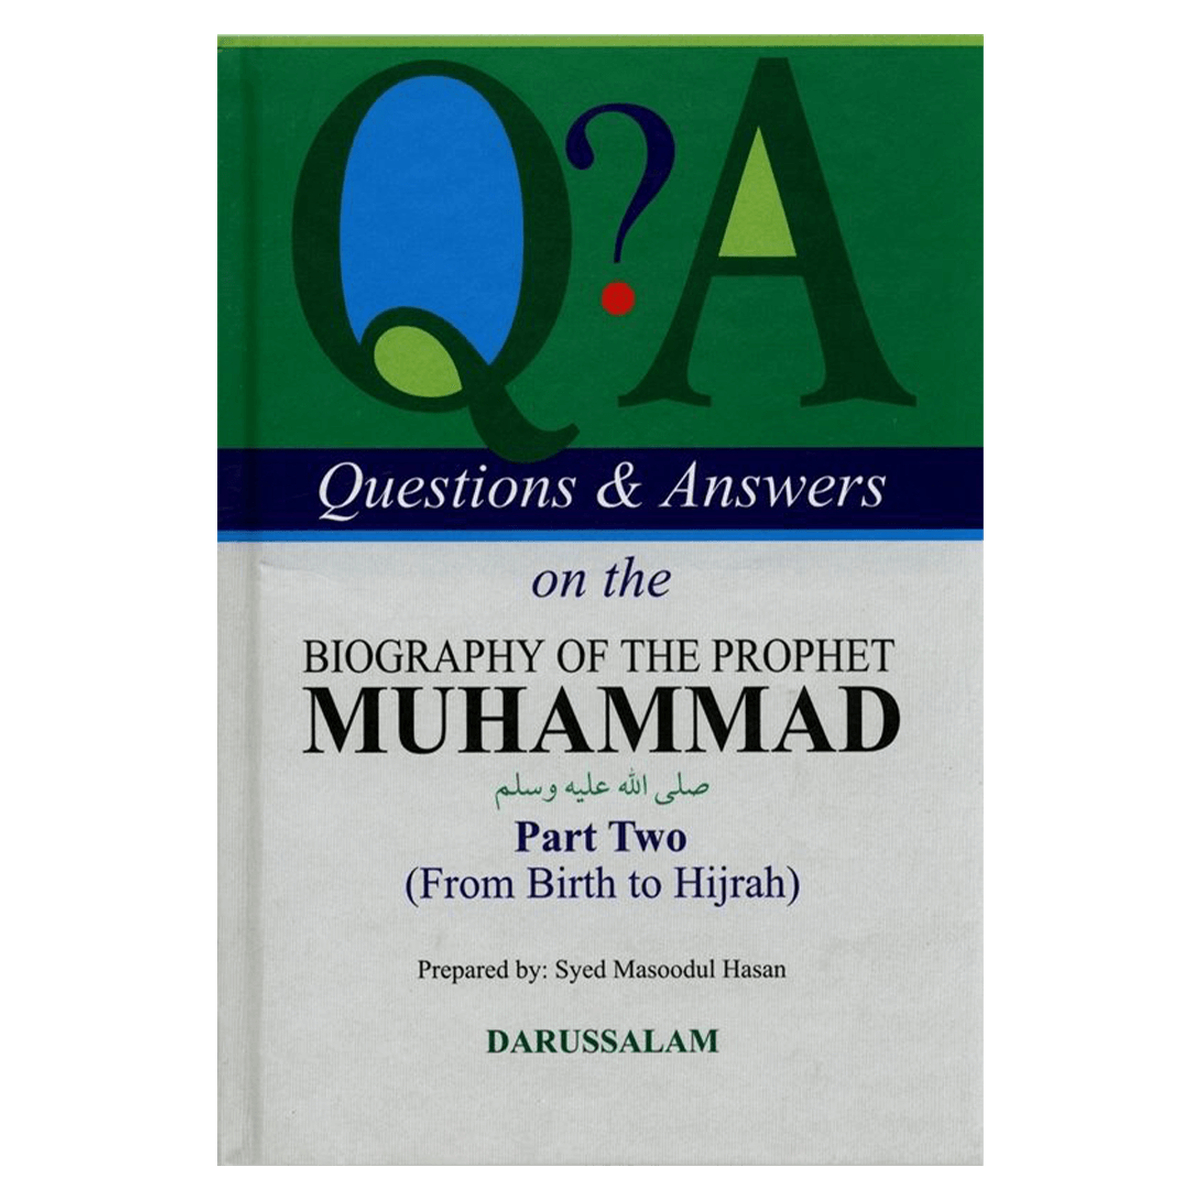 Q & A On The Biography Of The Prophet Muhammad PBUH Part 1 & 2 From Birth To Hijrah